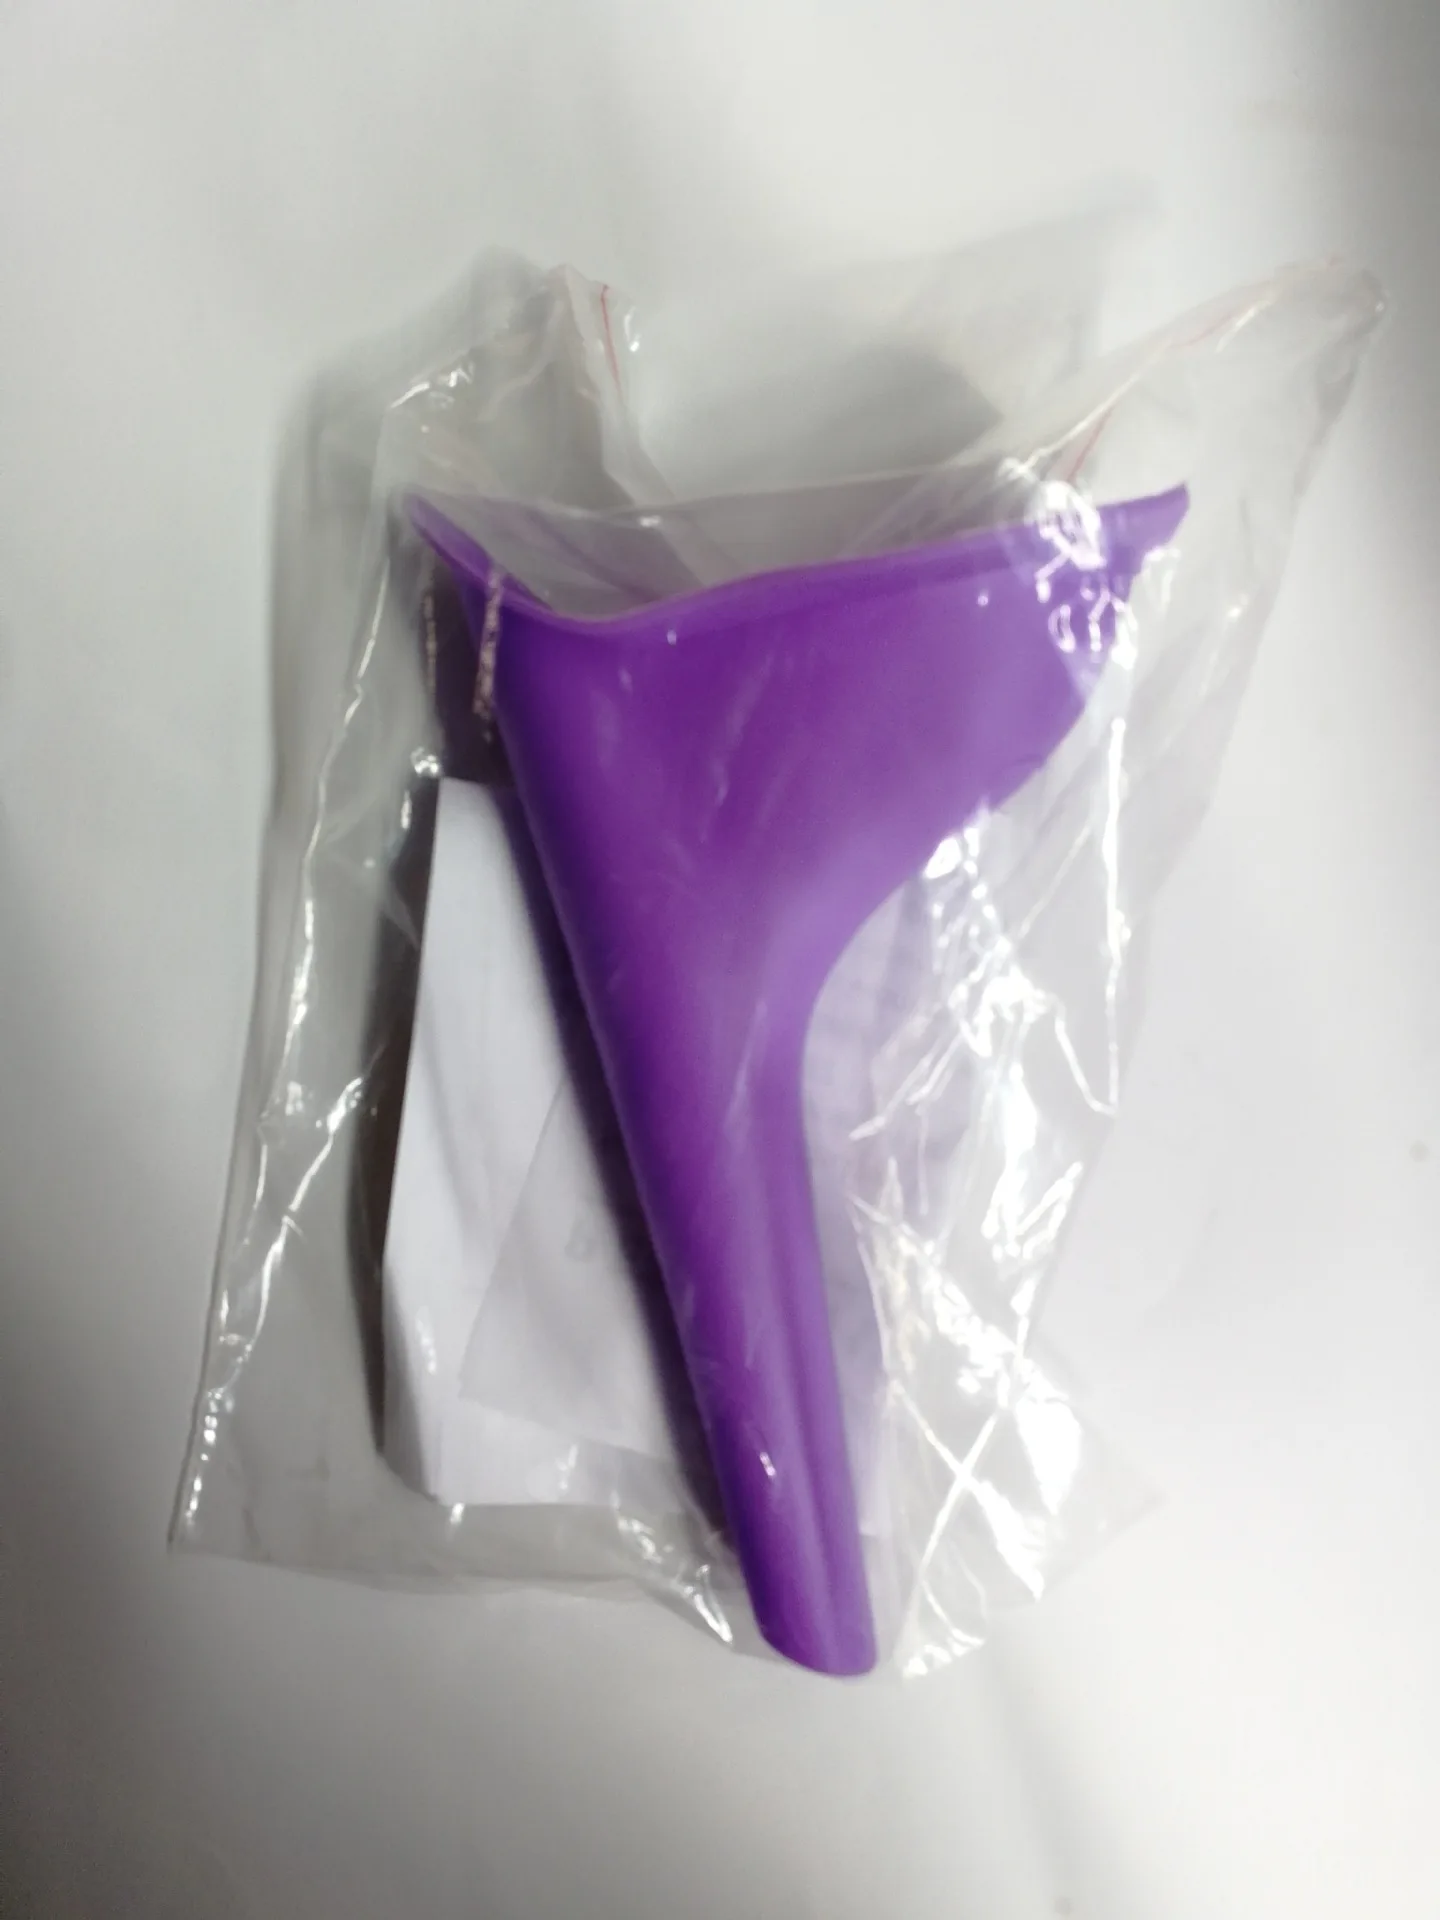 Standing Urinals for Women Female Urination Device, Women Standing Pee Portable Urinal Funnel Lets Pee Standing Up, Reusable Urinal Funnel For Ladies Pee Funnel for Camping, Outdoor, Pregnancy,